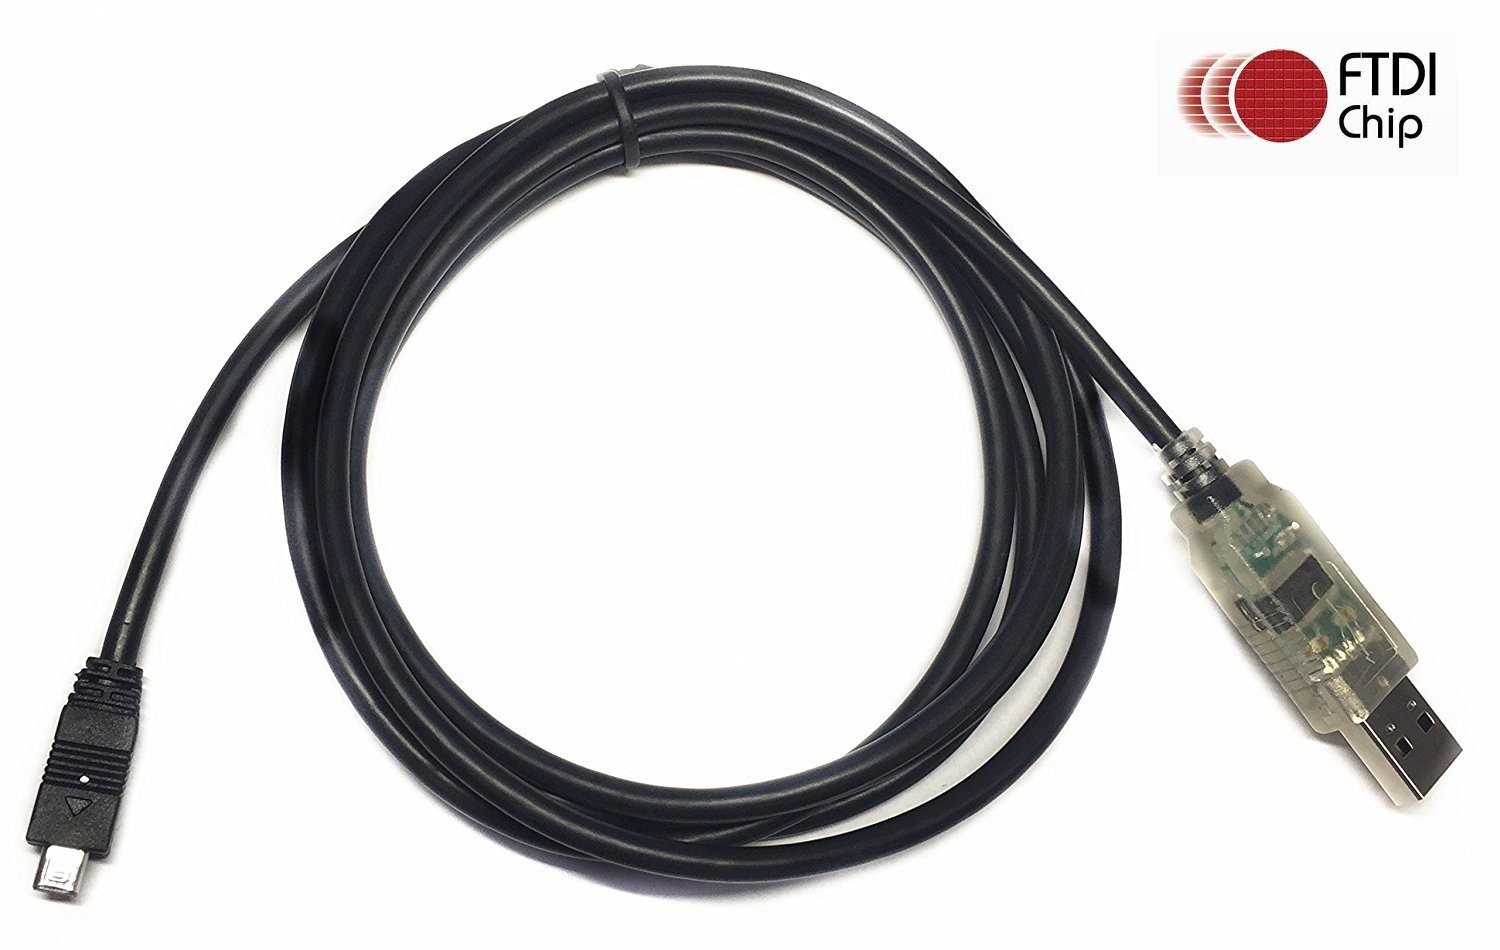 K Reader Programming Cable Free USB Easy to Carry and Store for FTDI Chips for The Latest radios from Programming Cable for FTDI Junluck Programming Cable